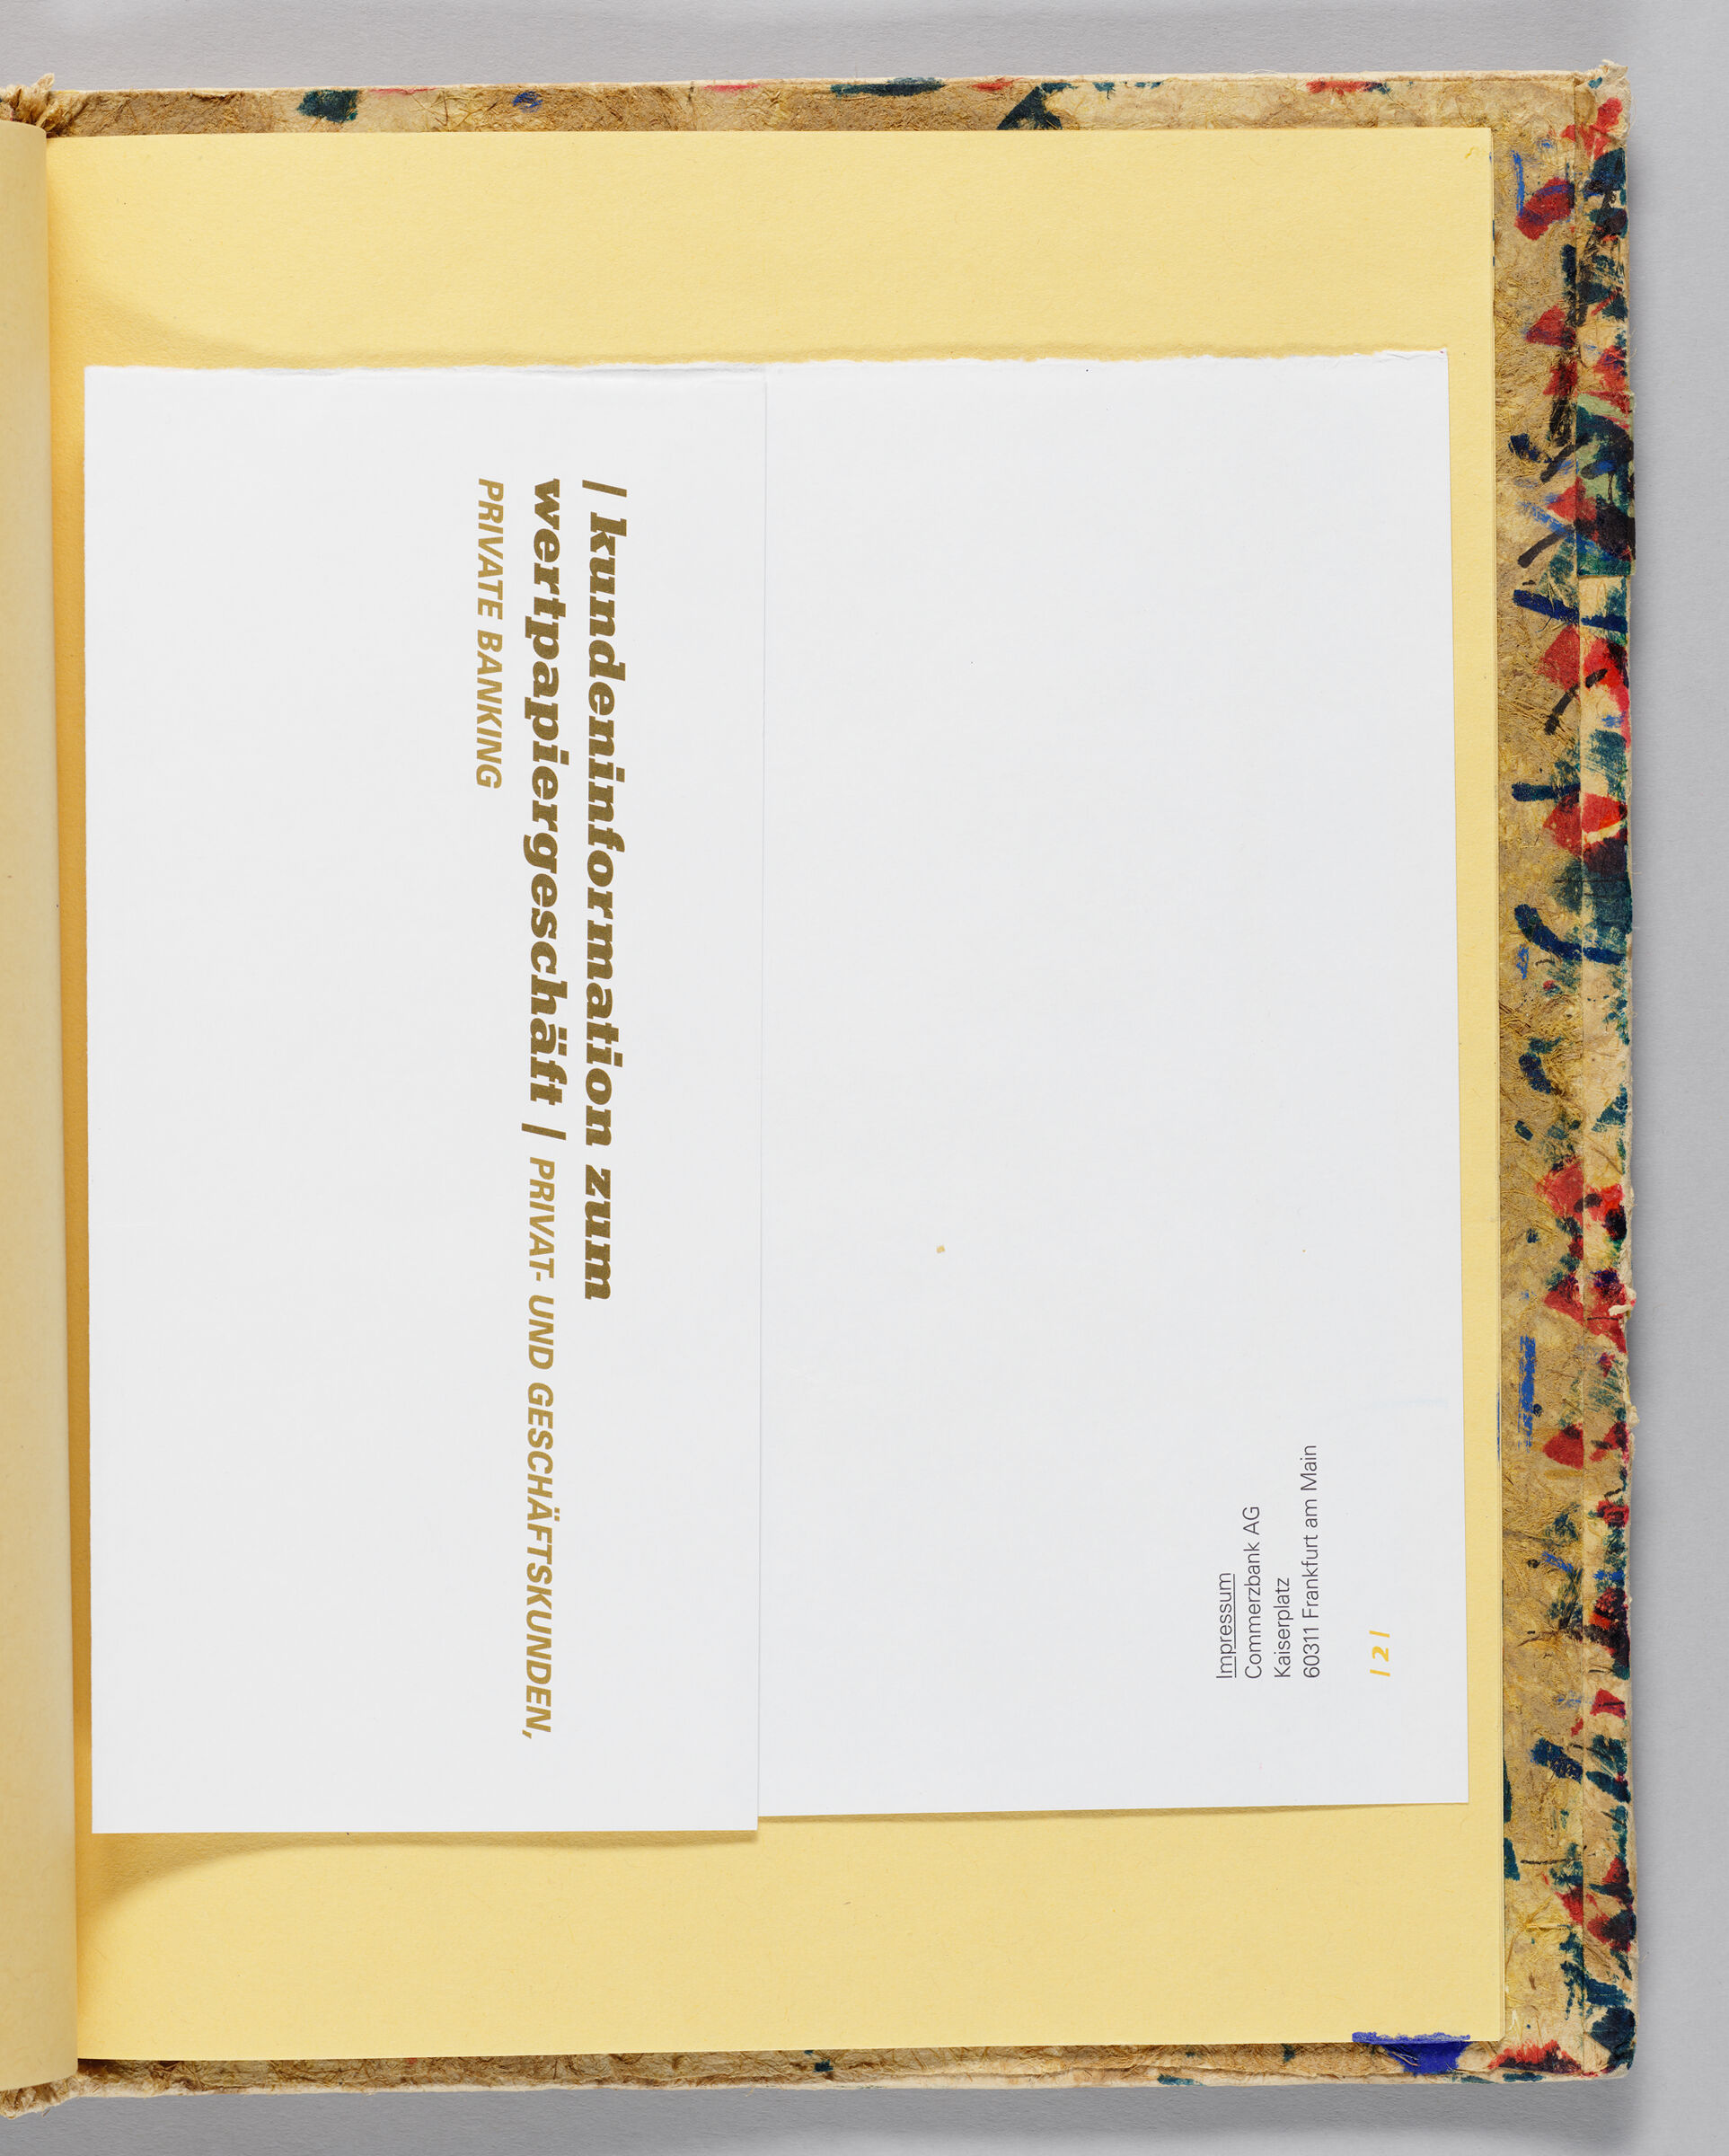 Inserted Commerzbank Mailer